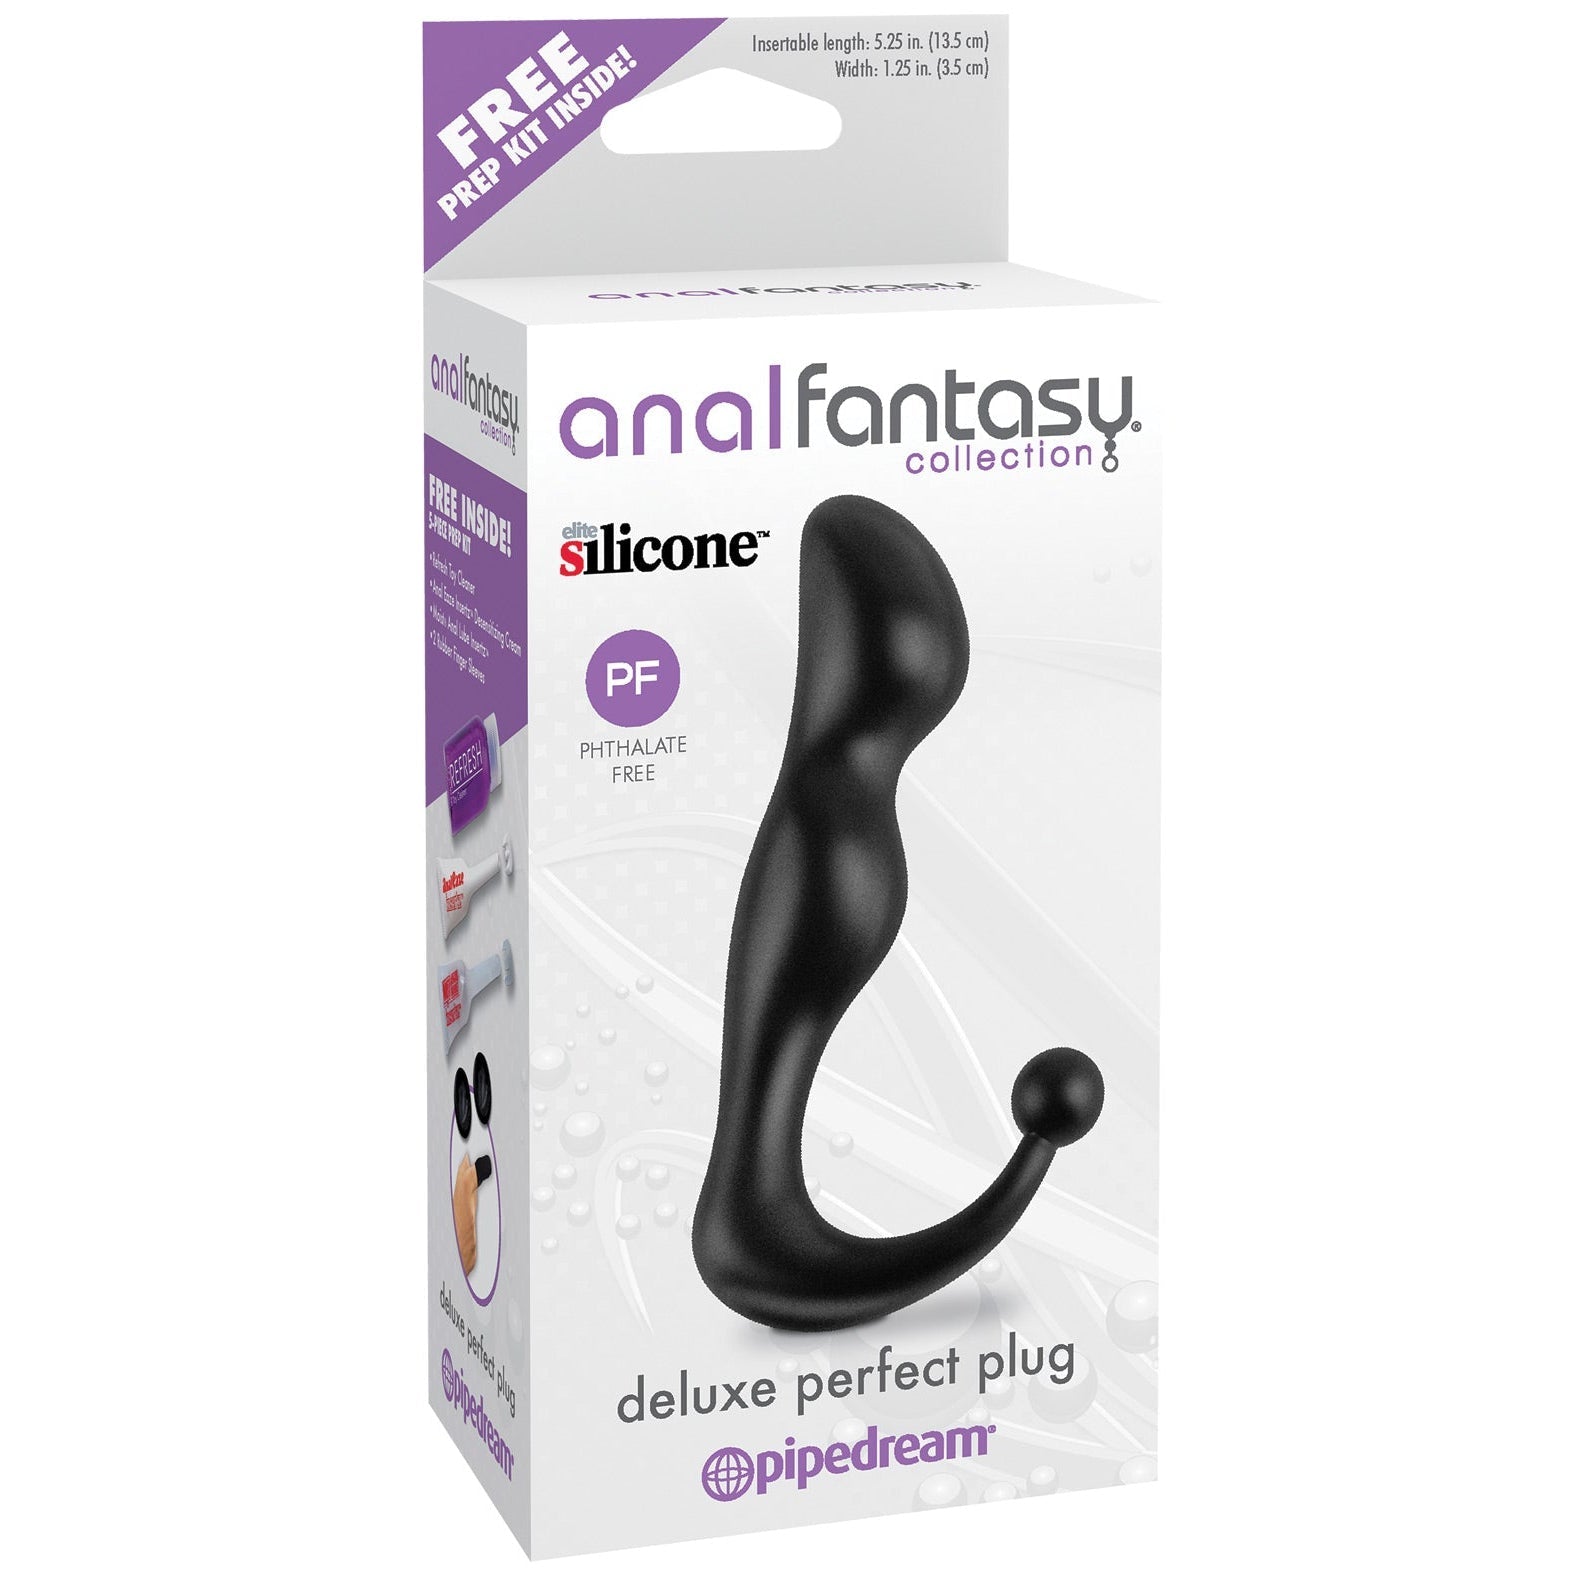 Anal Fantasy Collection Perfect Plug